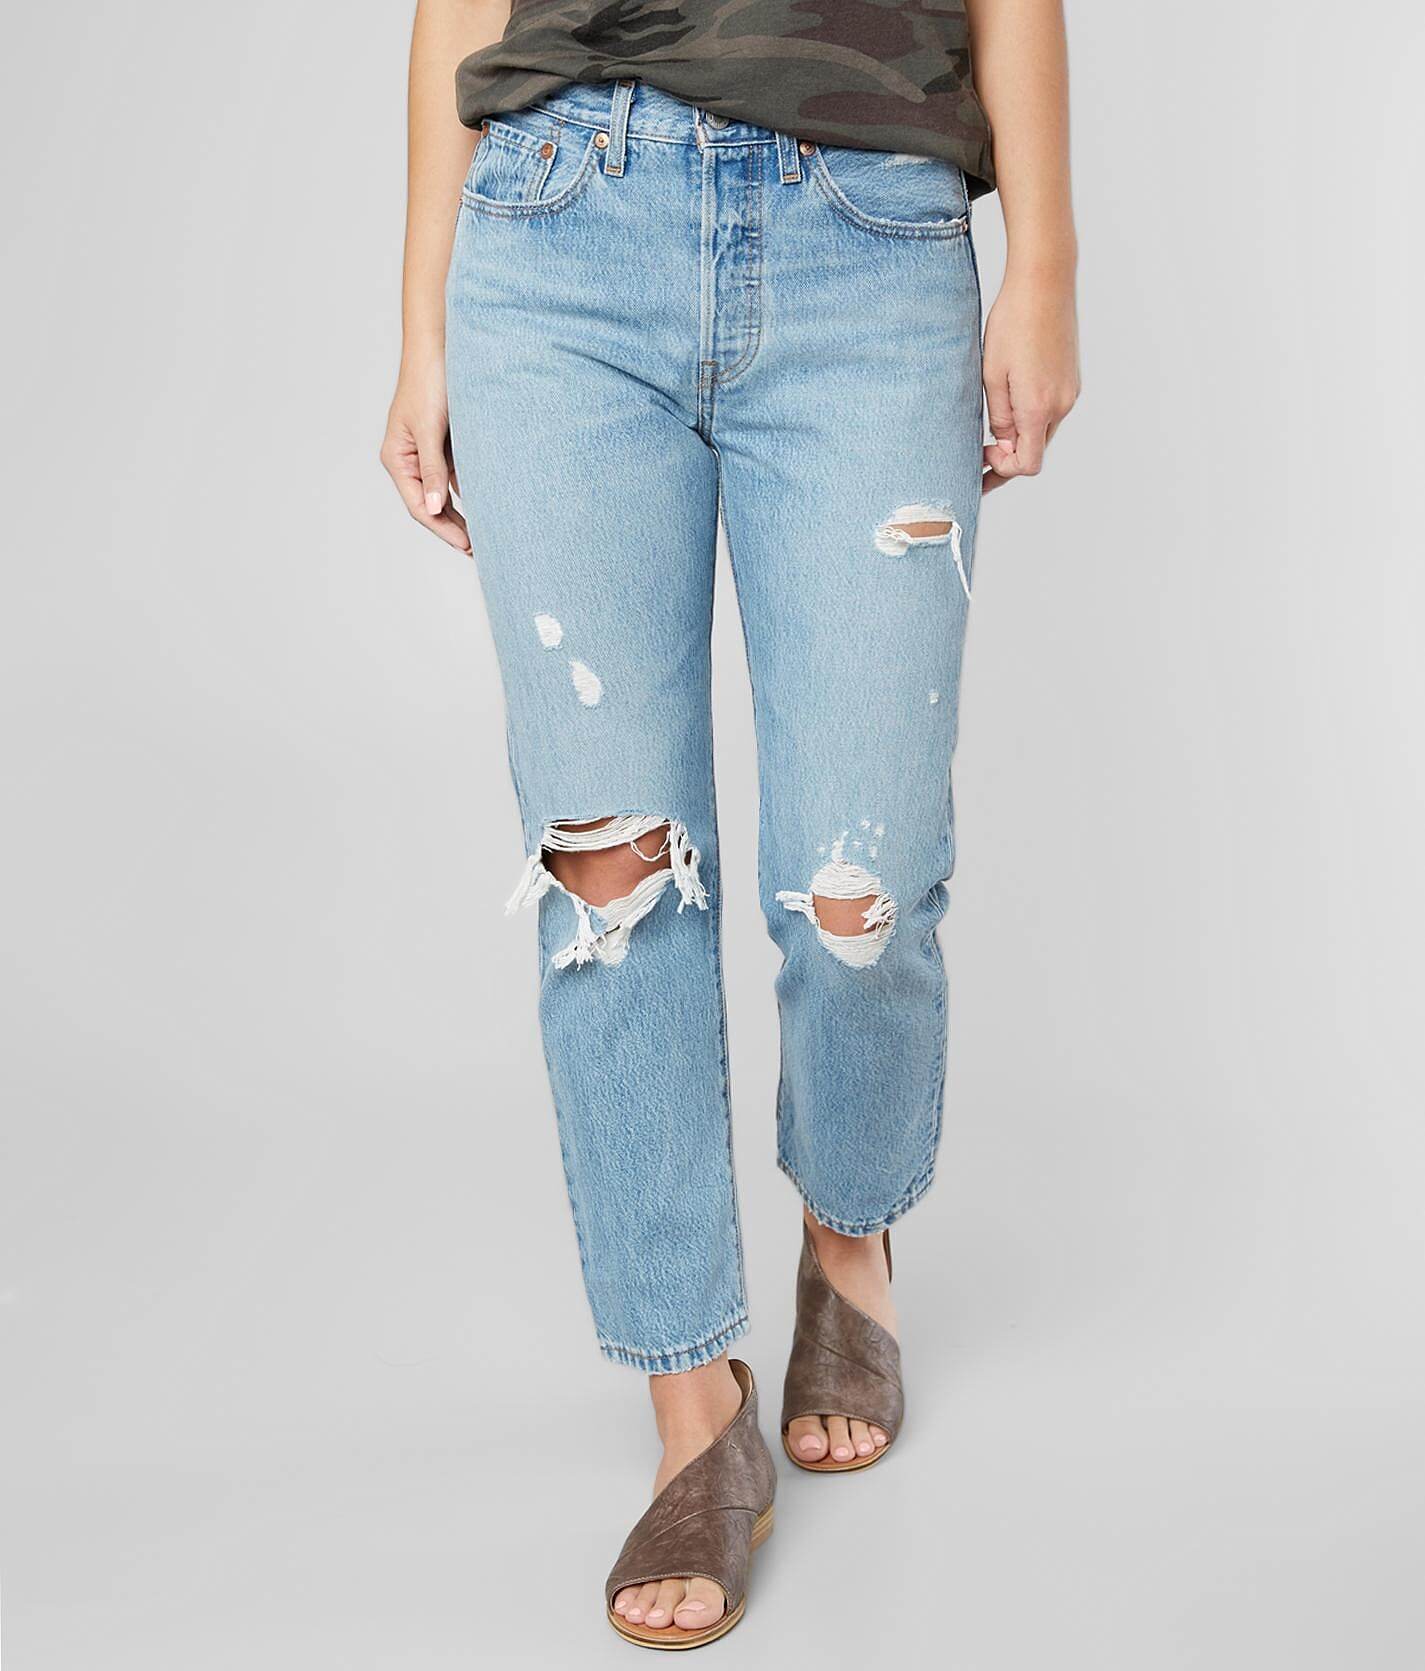 levi's high rise wedgie jean